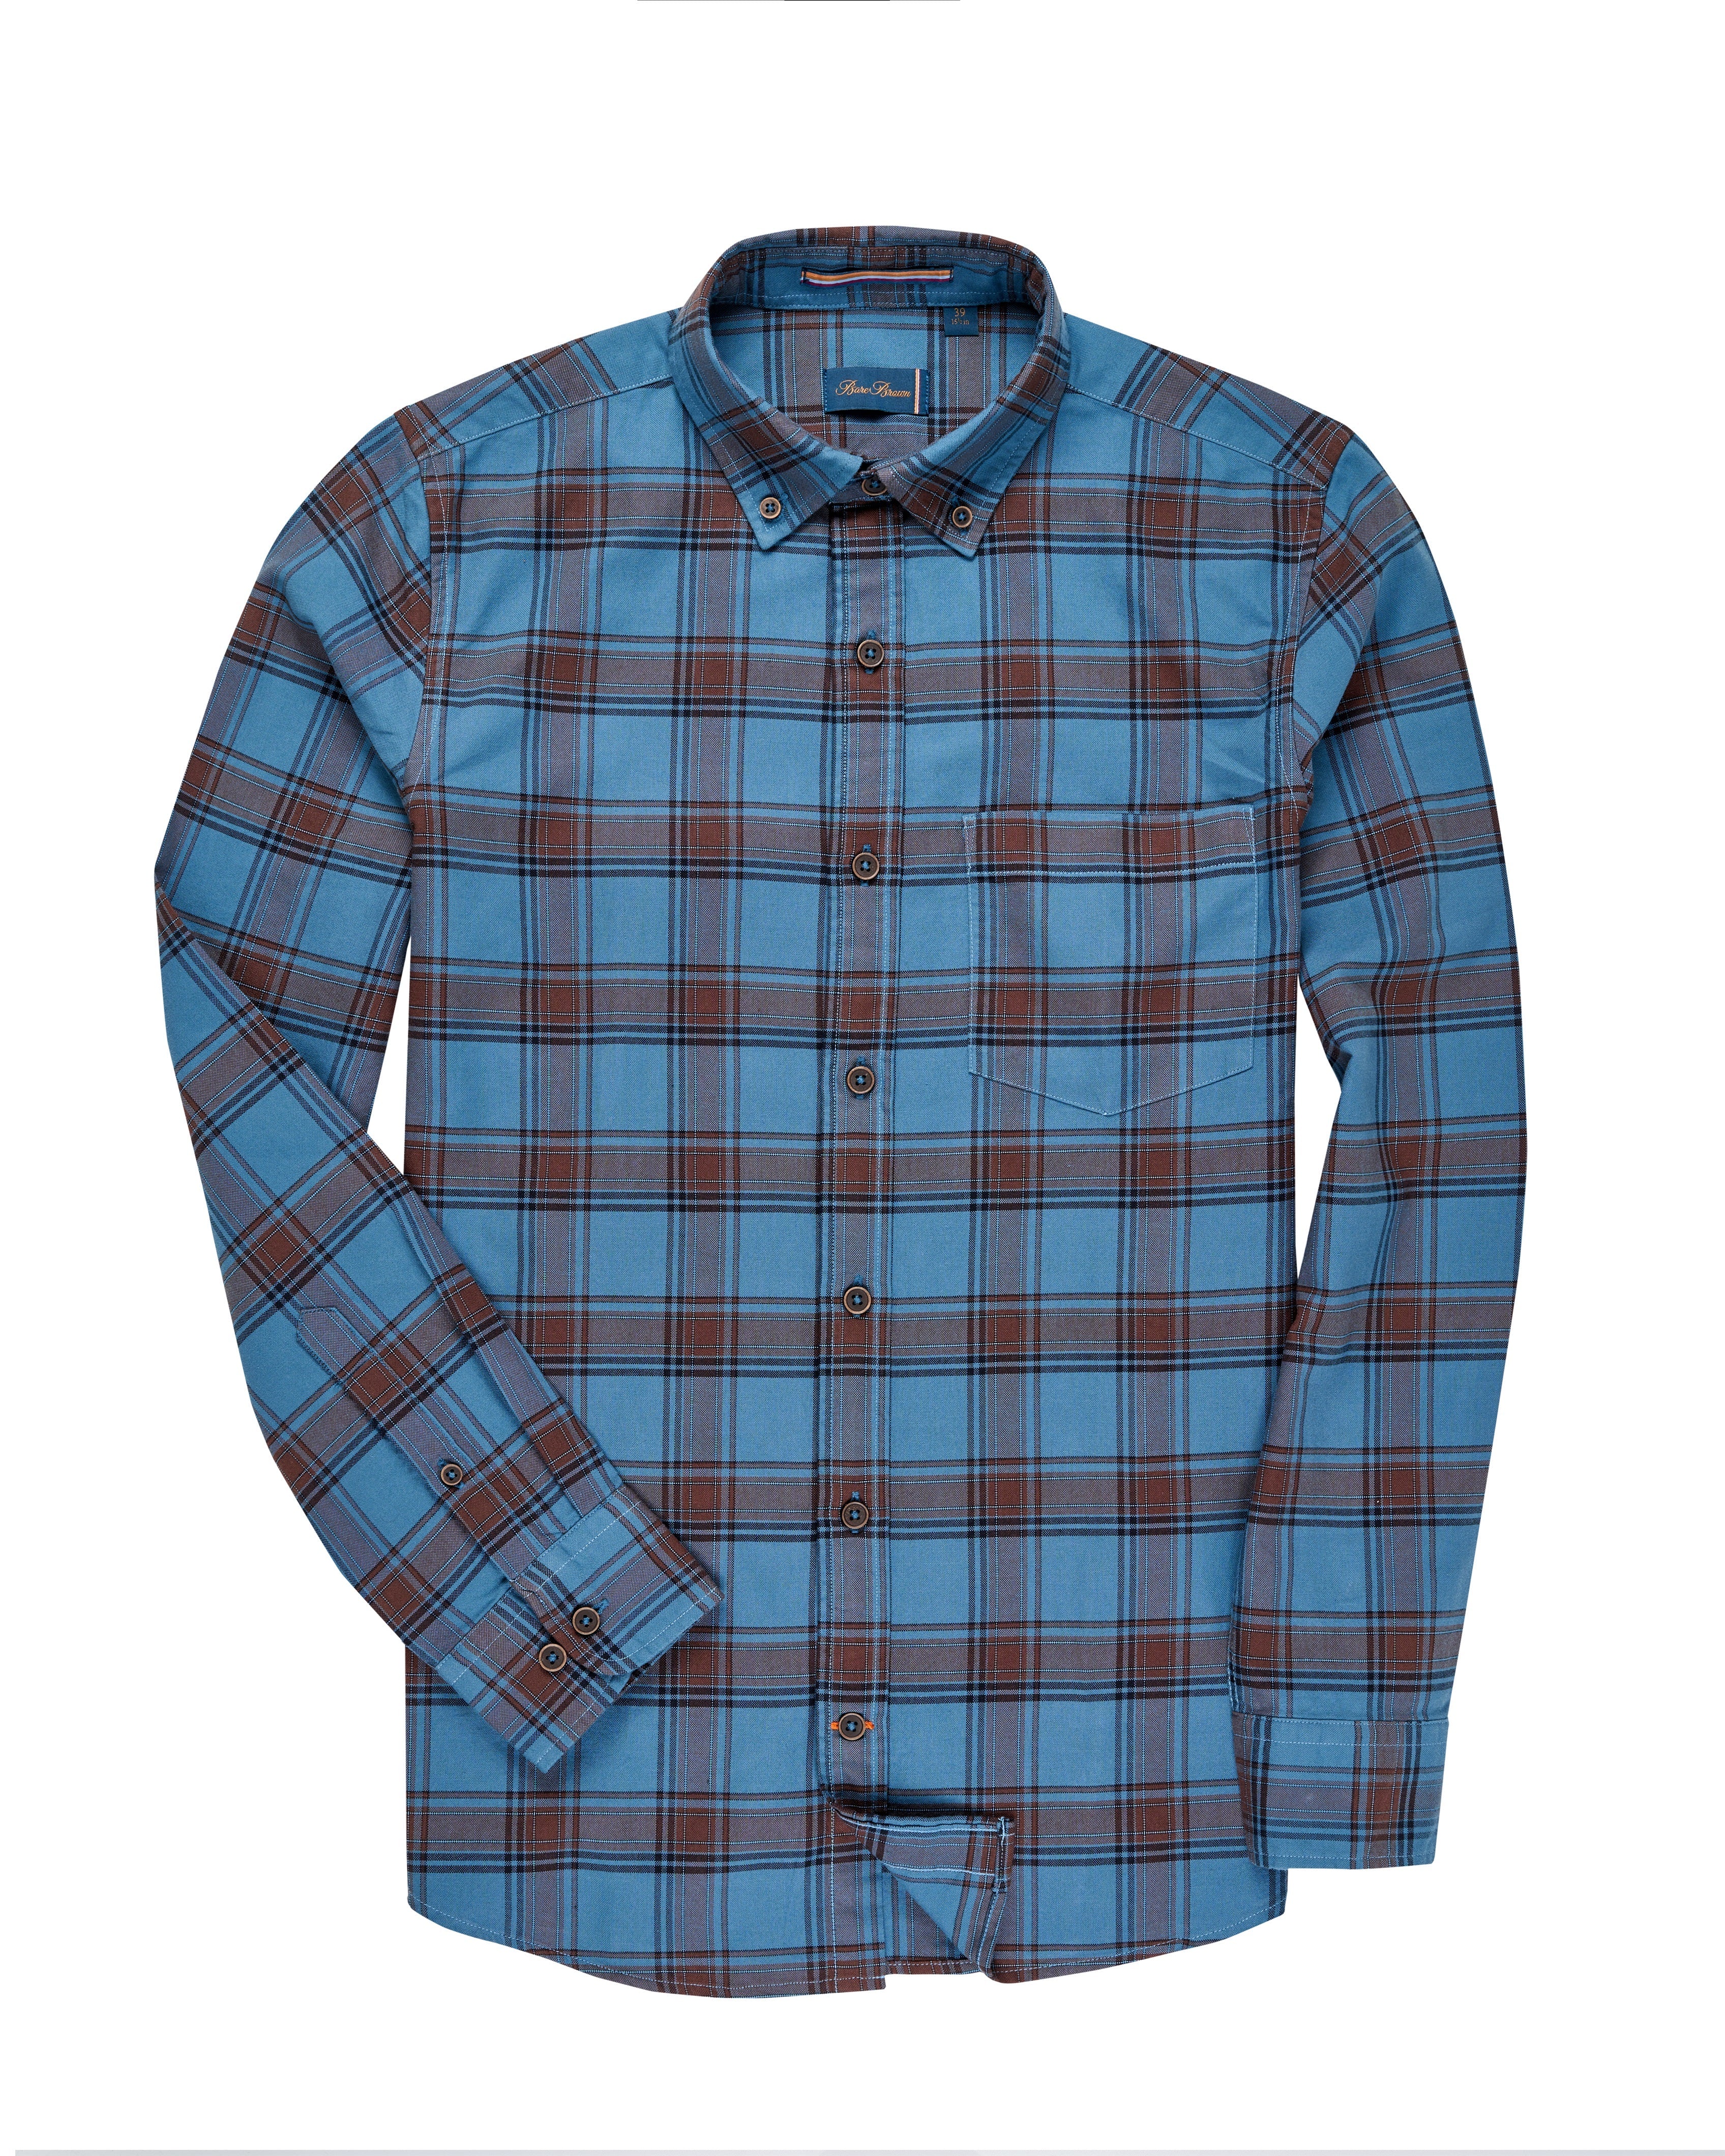 Bare Brown Checkered Cotton Spandex Shirt, Slim Fit with Full Sleeves - Blue